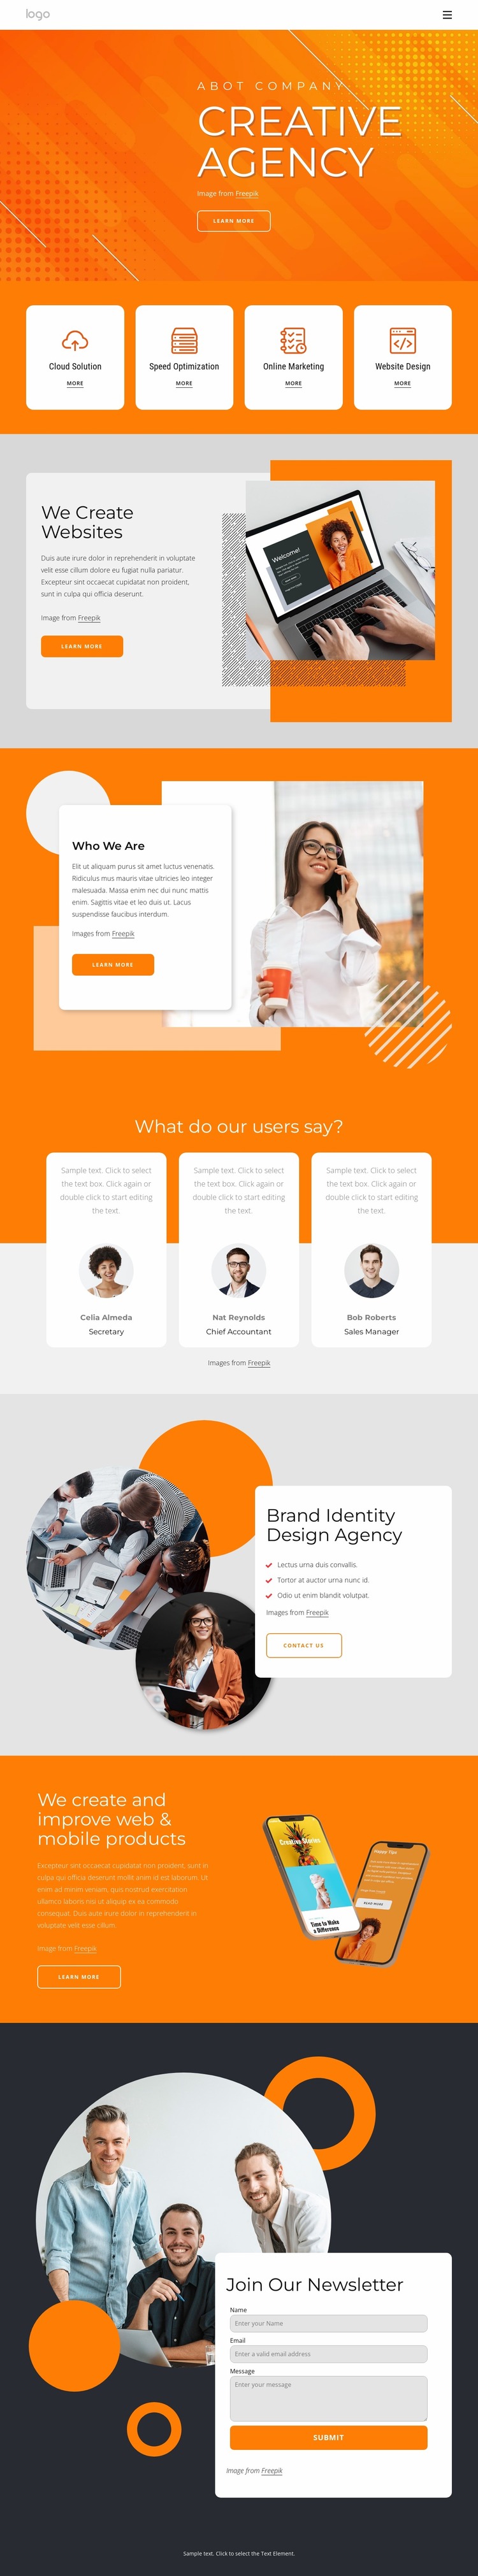 The creative agency for your next big thing Website Mockup